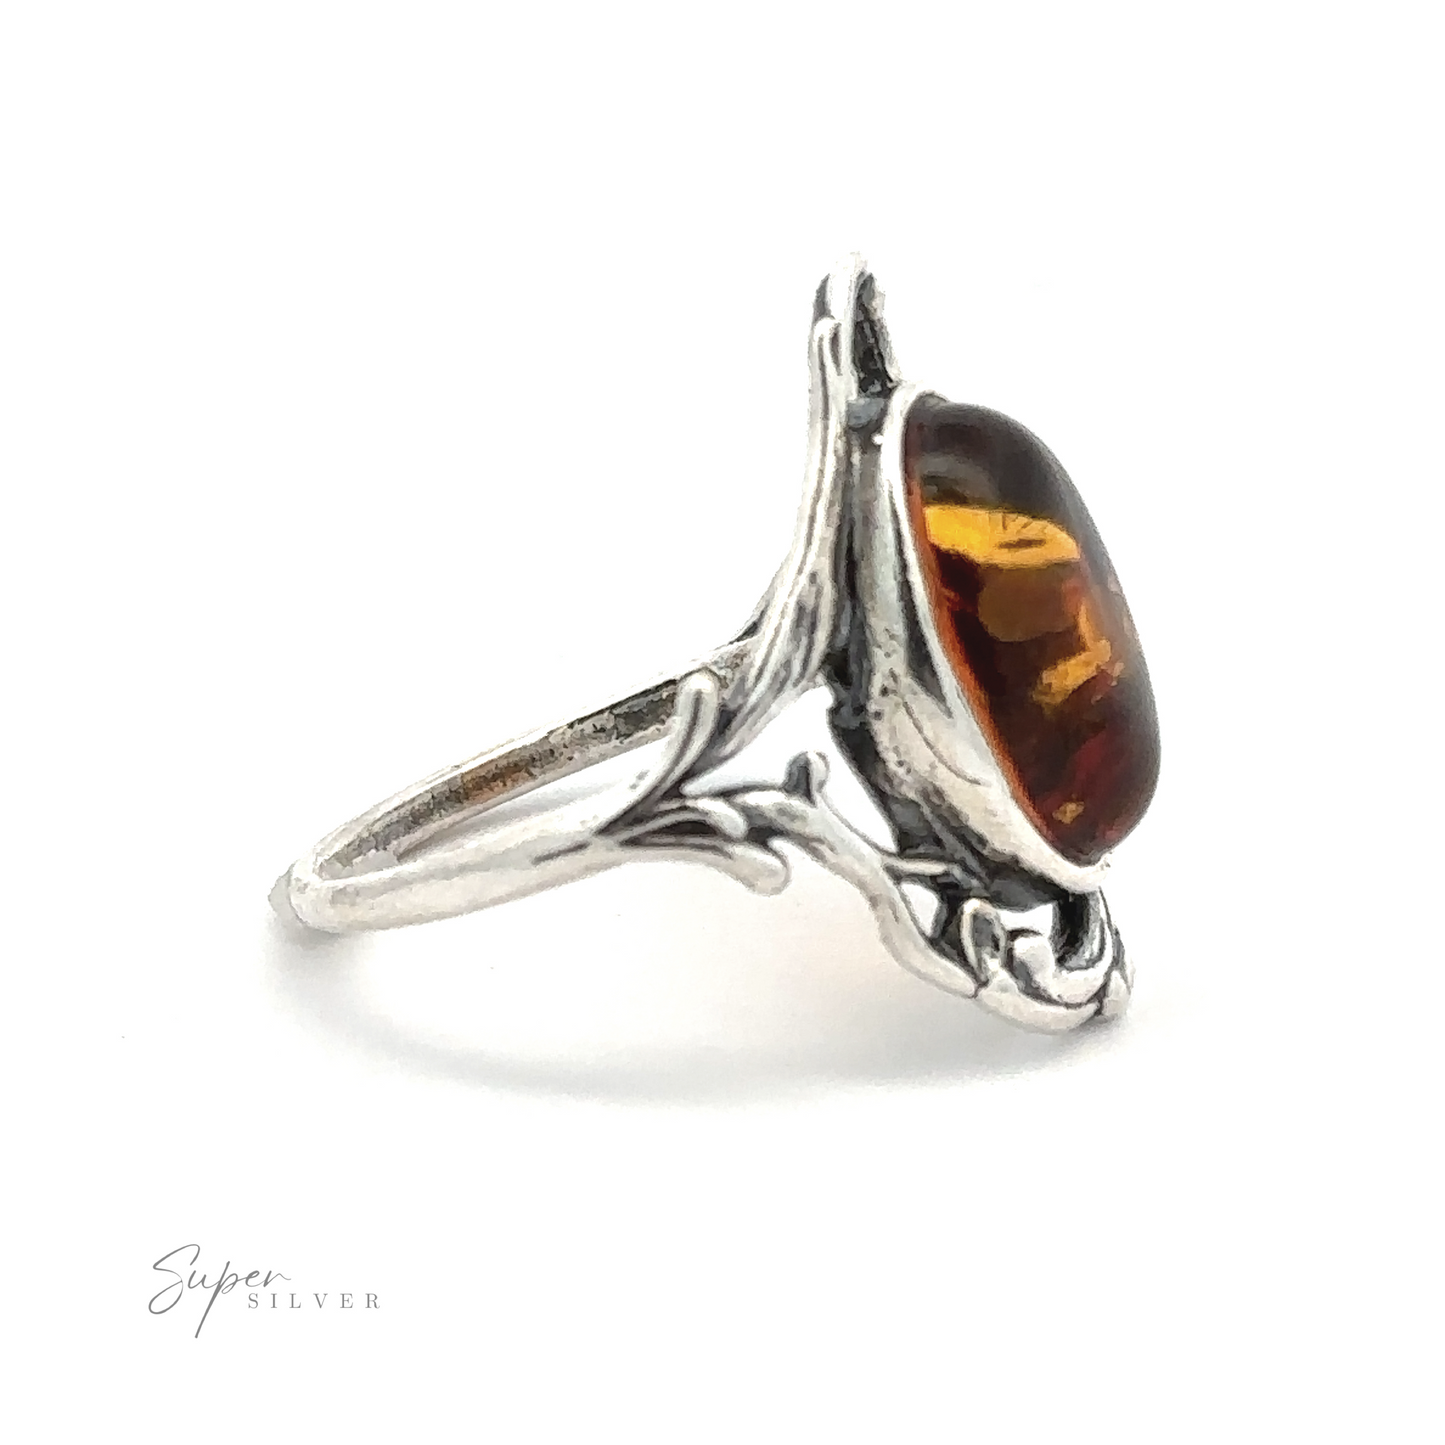 
                  
                    A silver ring featuring an Amber Ring with Vine Detailing in an ornate, vintage design setting. The brand name "Super Silver" is visible in the lower left corner, adding to its Antique Allure.
                  
                